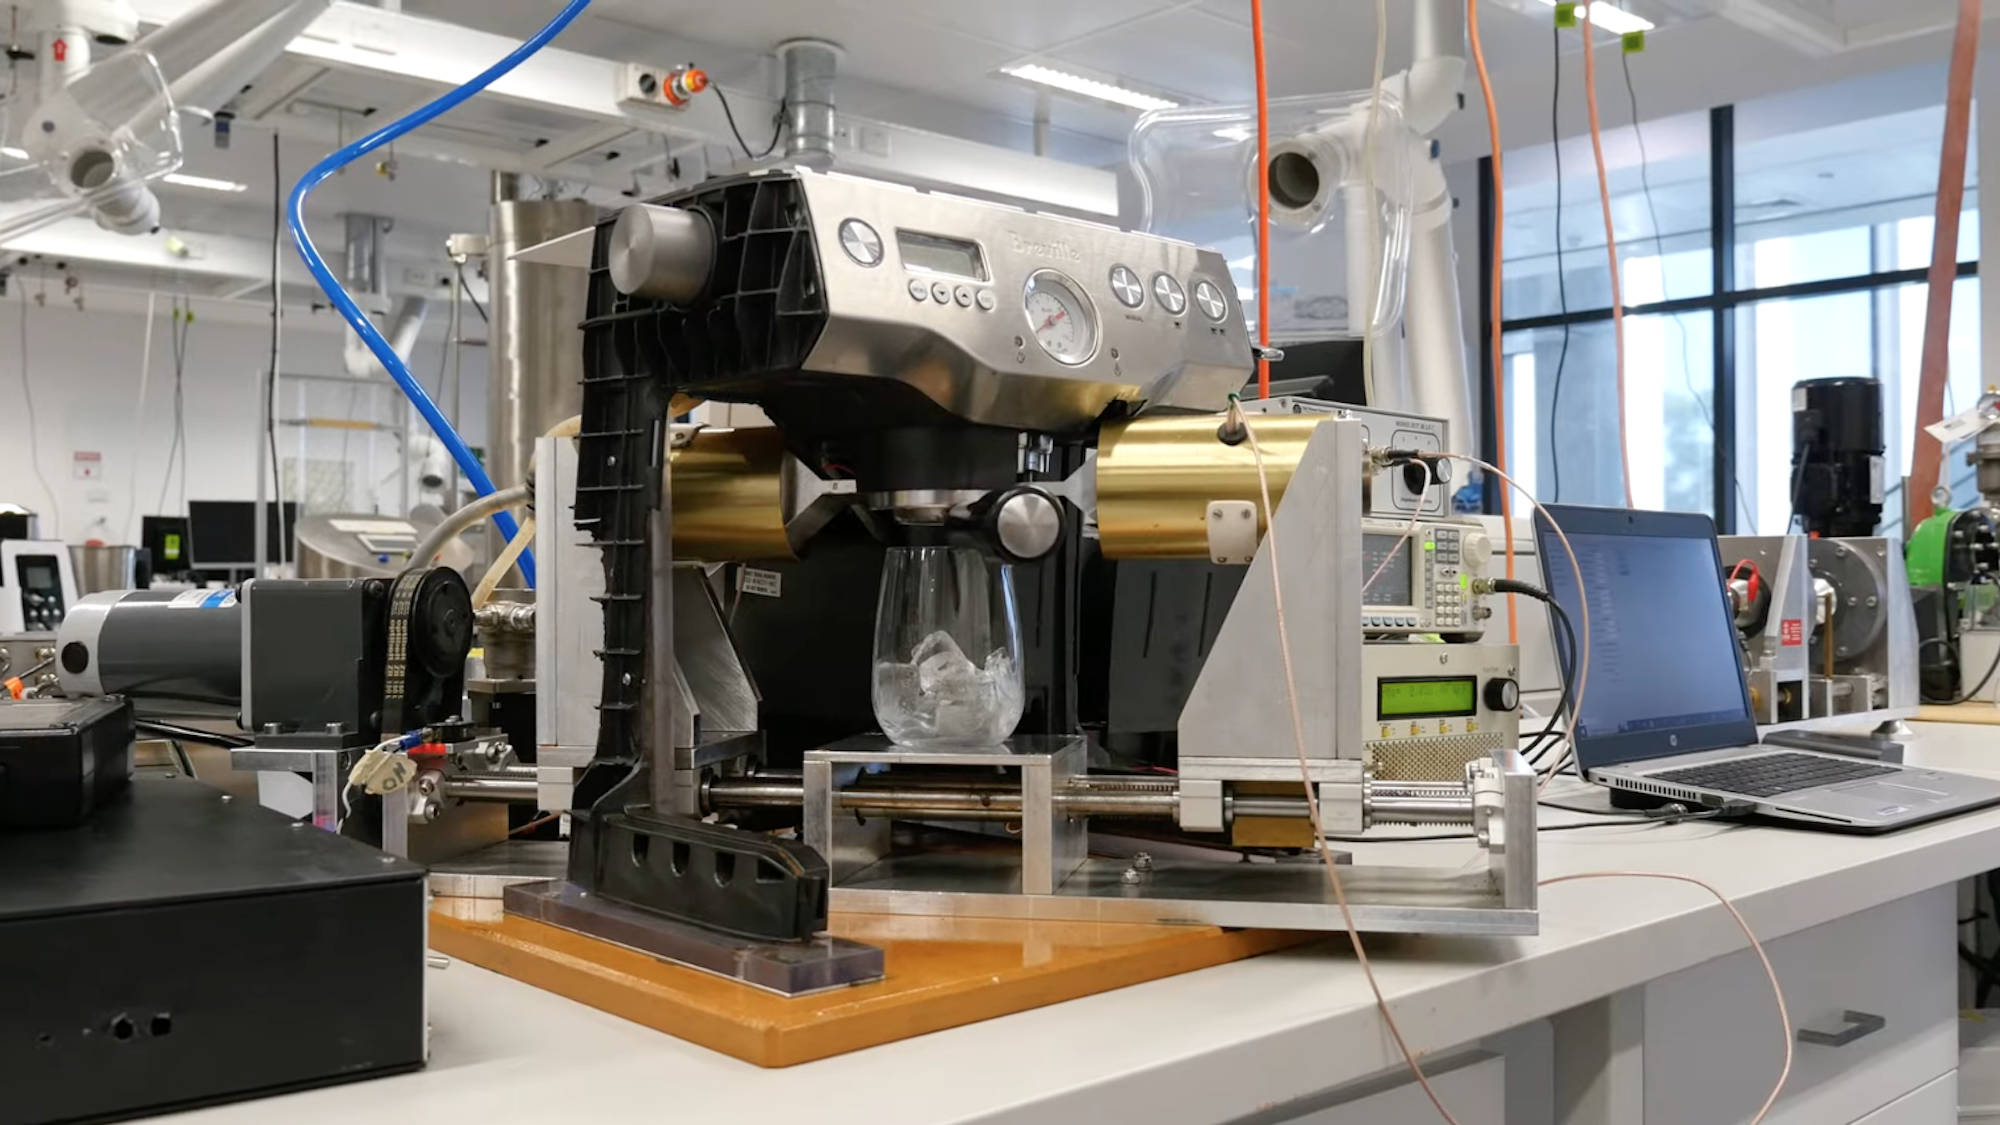 Blasting coffee grounds with ultrasonic waves creates a 60-second cold brew | Popular Science